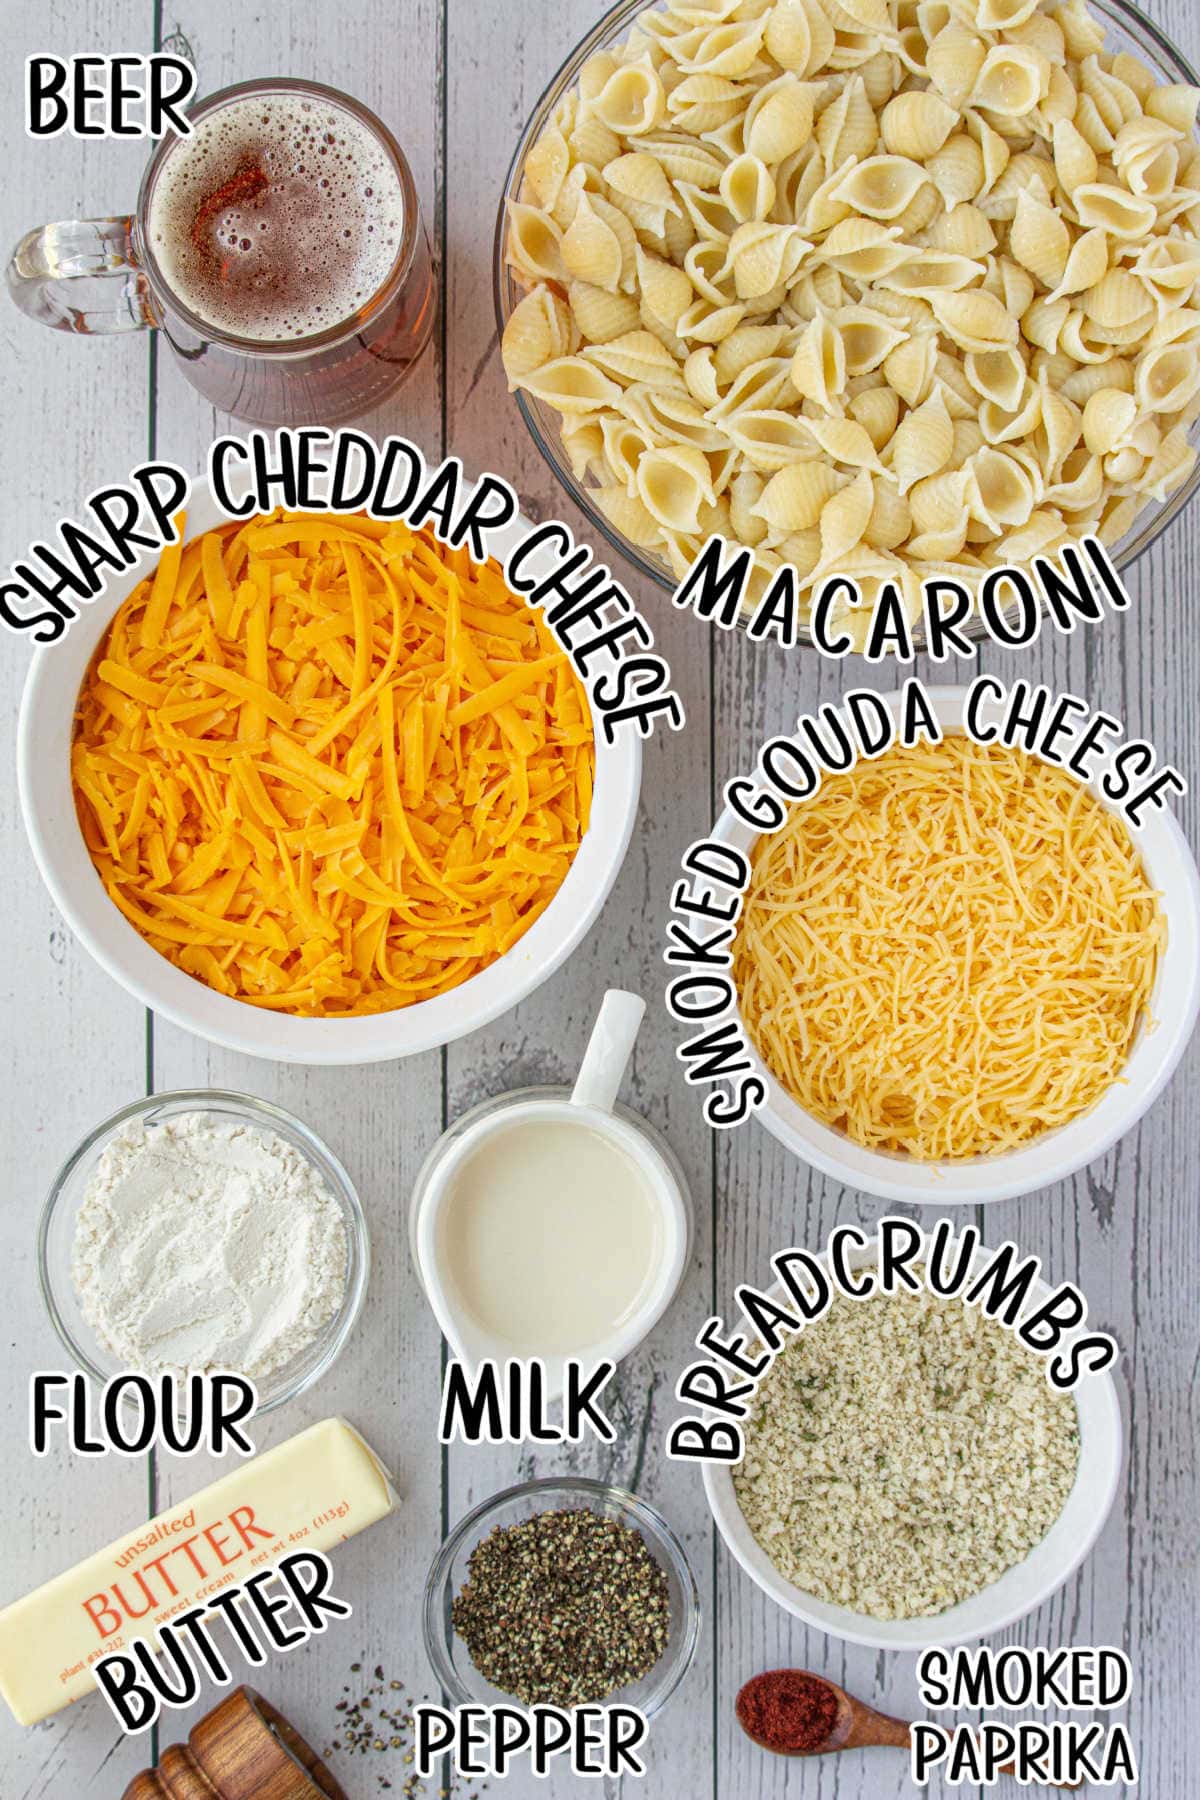 Labeled ingredients for macaroni and cheese with beer.